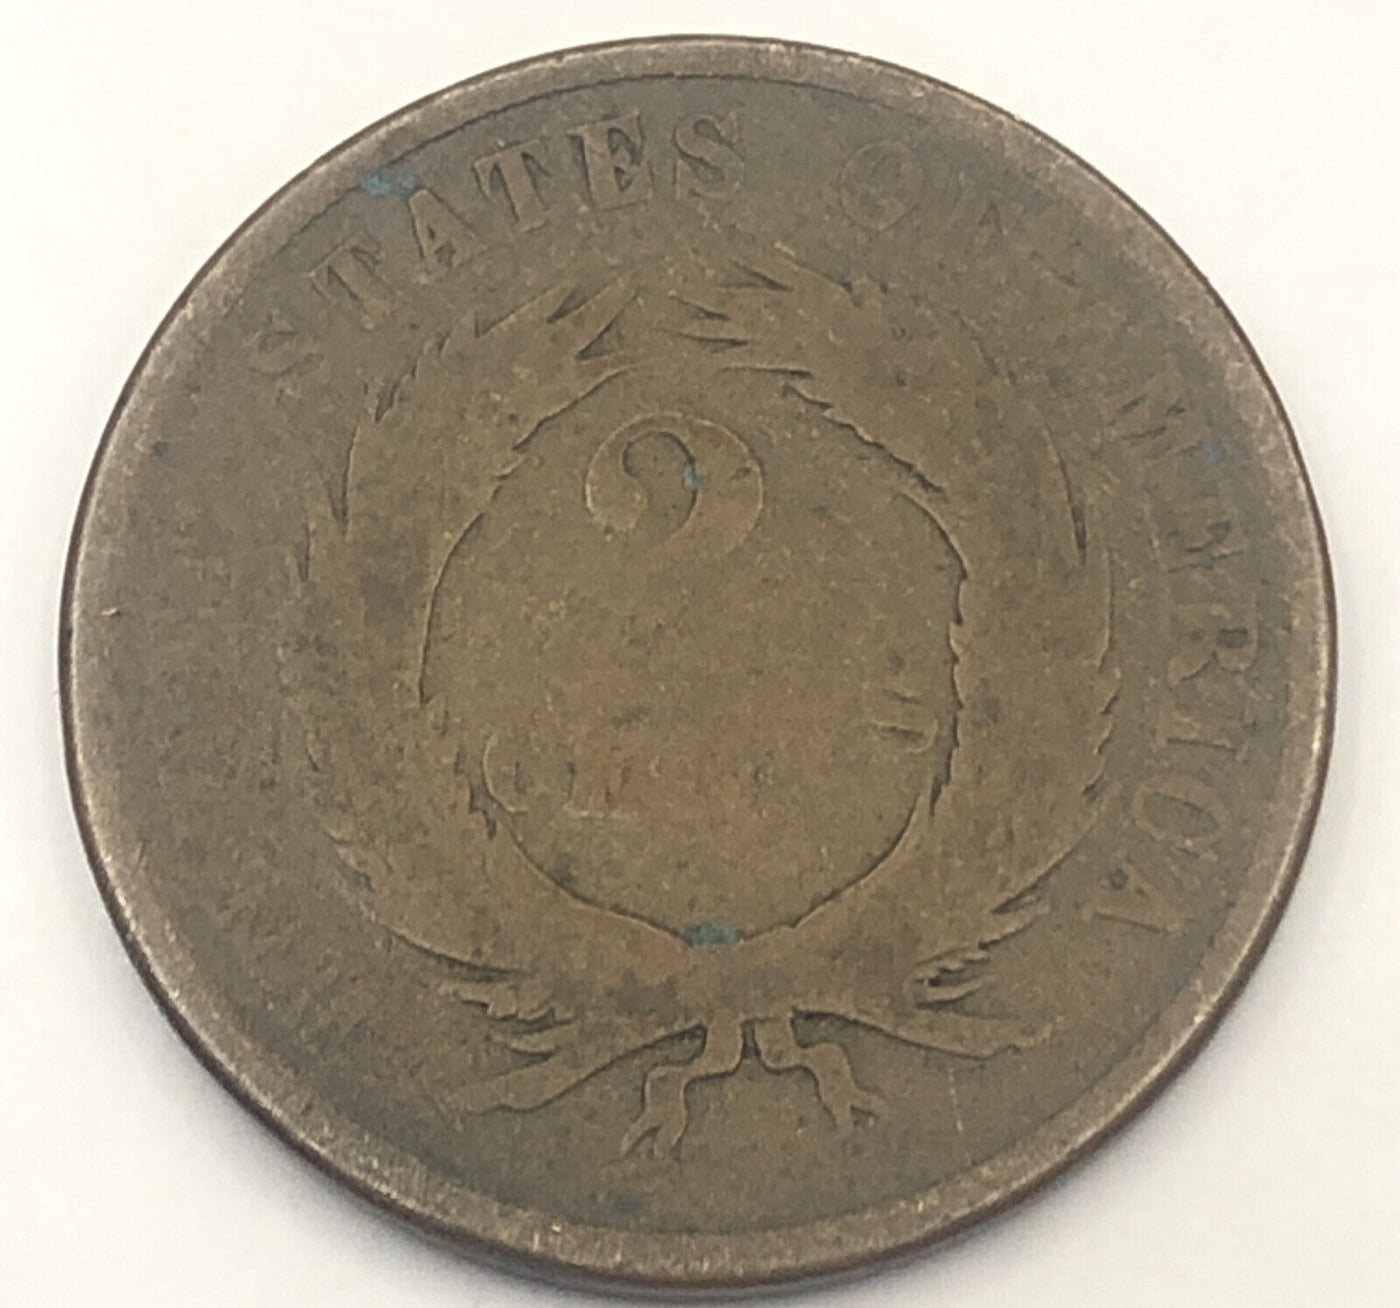 2c piece 1865 very good avg condition. Get It Now!